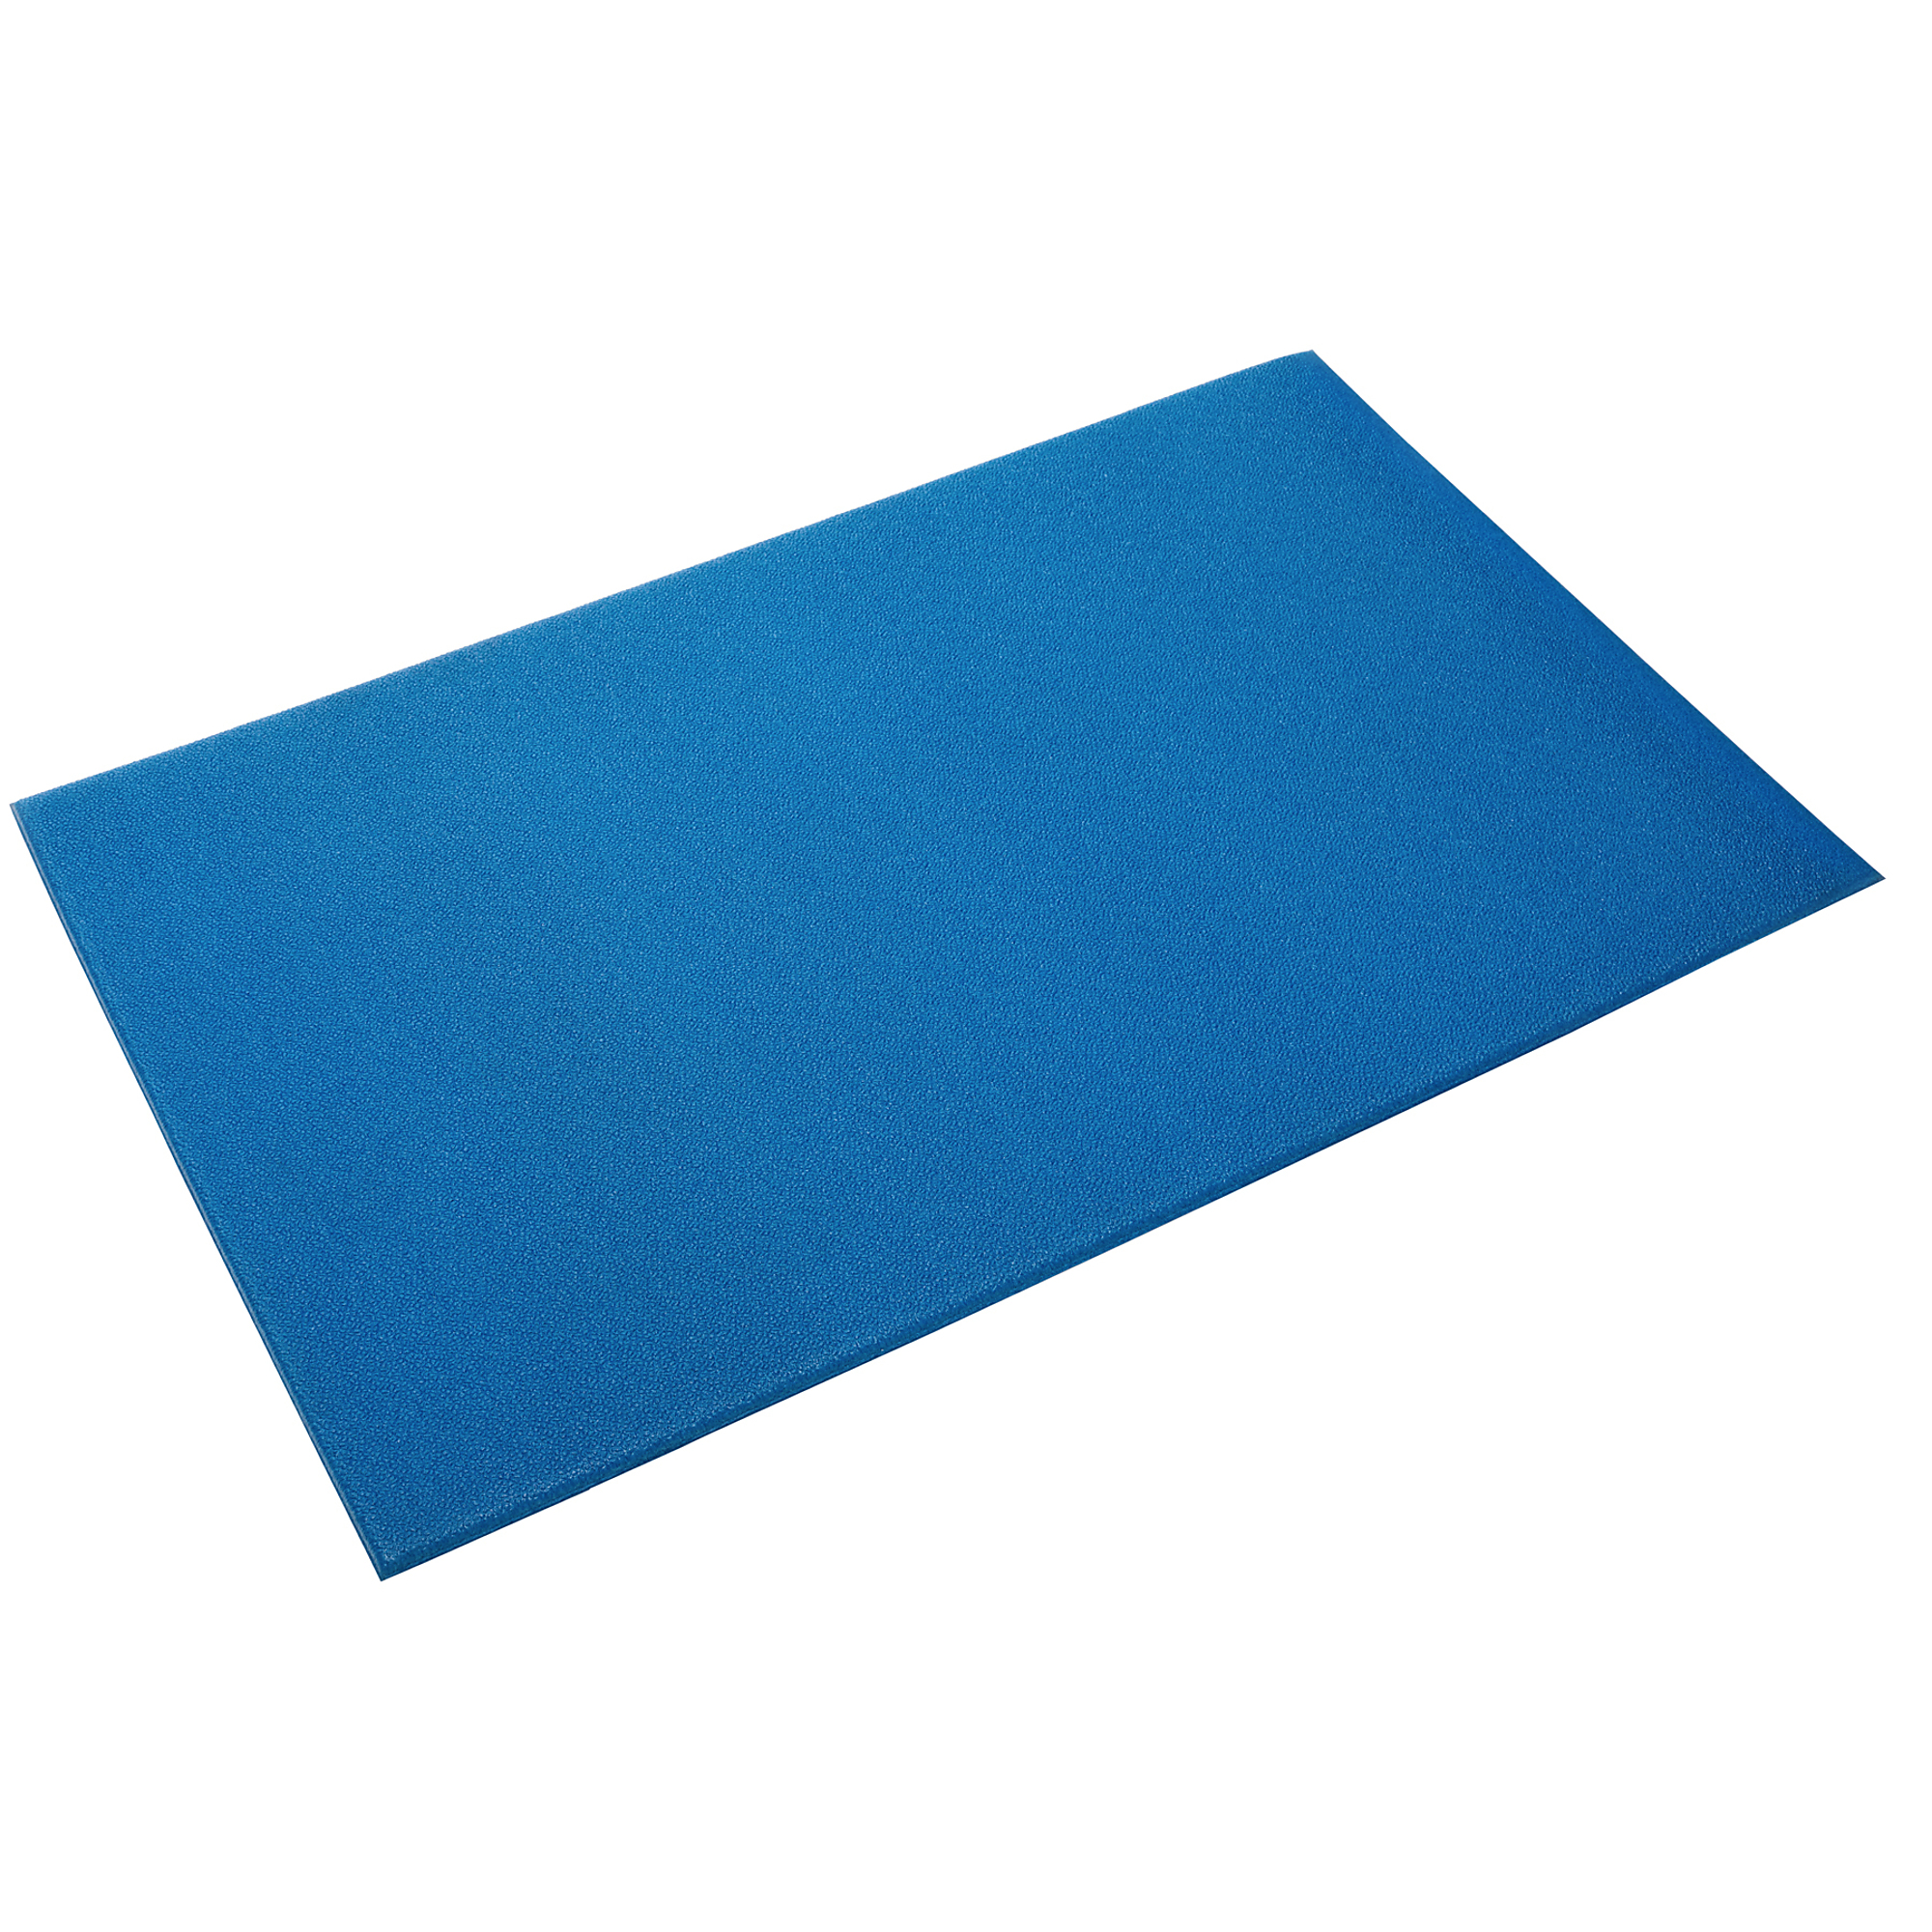 Crown Matting Technologies, Comfort-King 1/2 3ft.x5ft. Royal Blue, Width 36 in, Length 60 in, Thickness 1/2 in, Model K4 0035BL